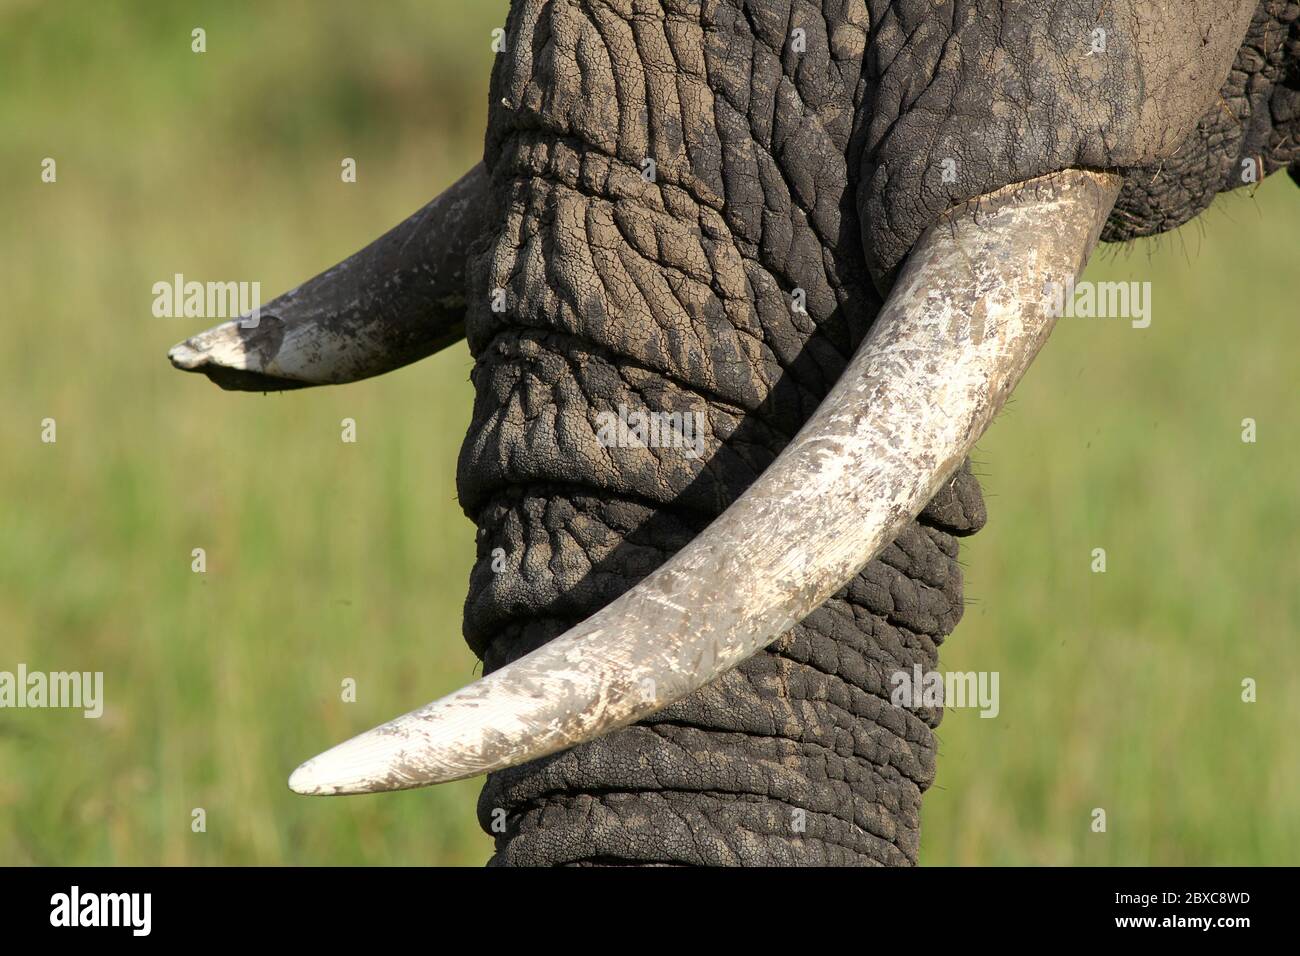 Close-up of an elephant's trunk with a broken tusk, green-yellow blurred background Stock Photo